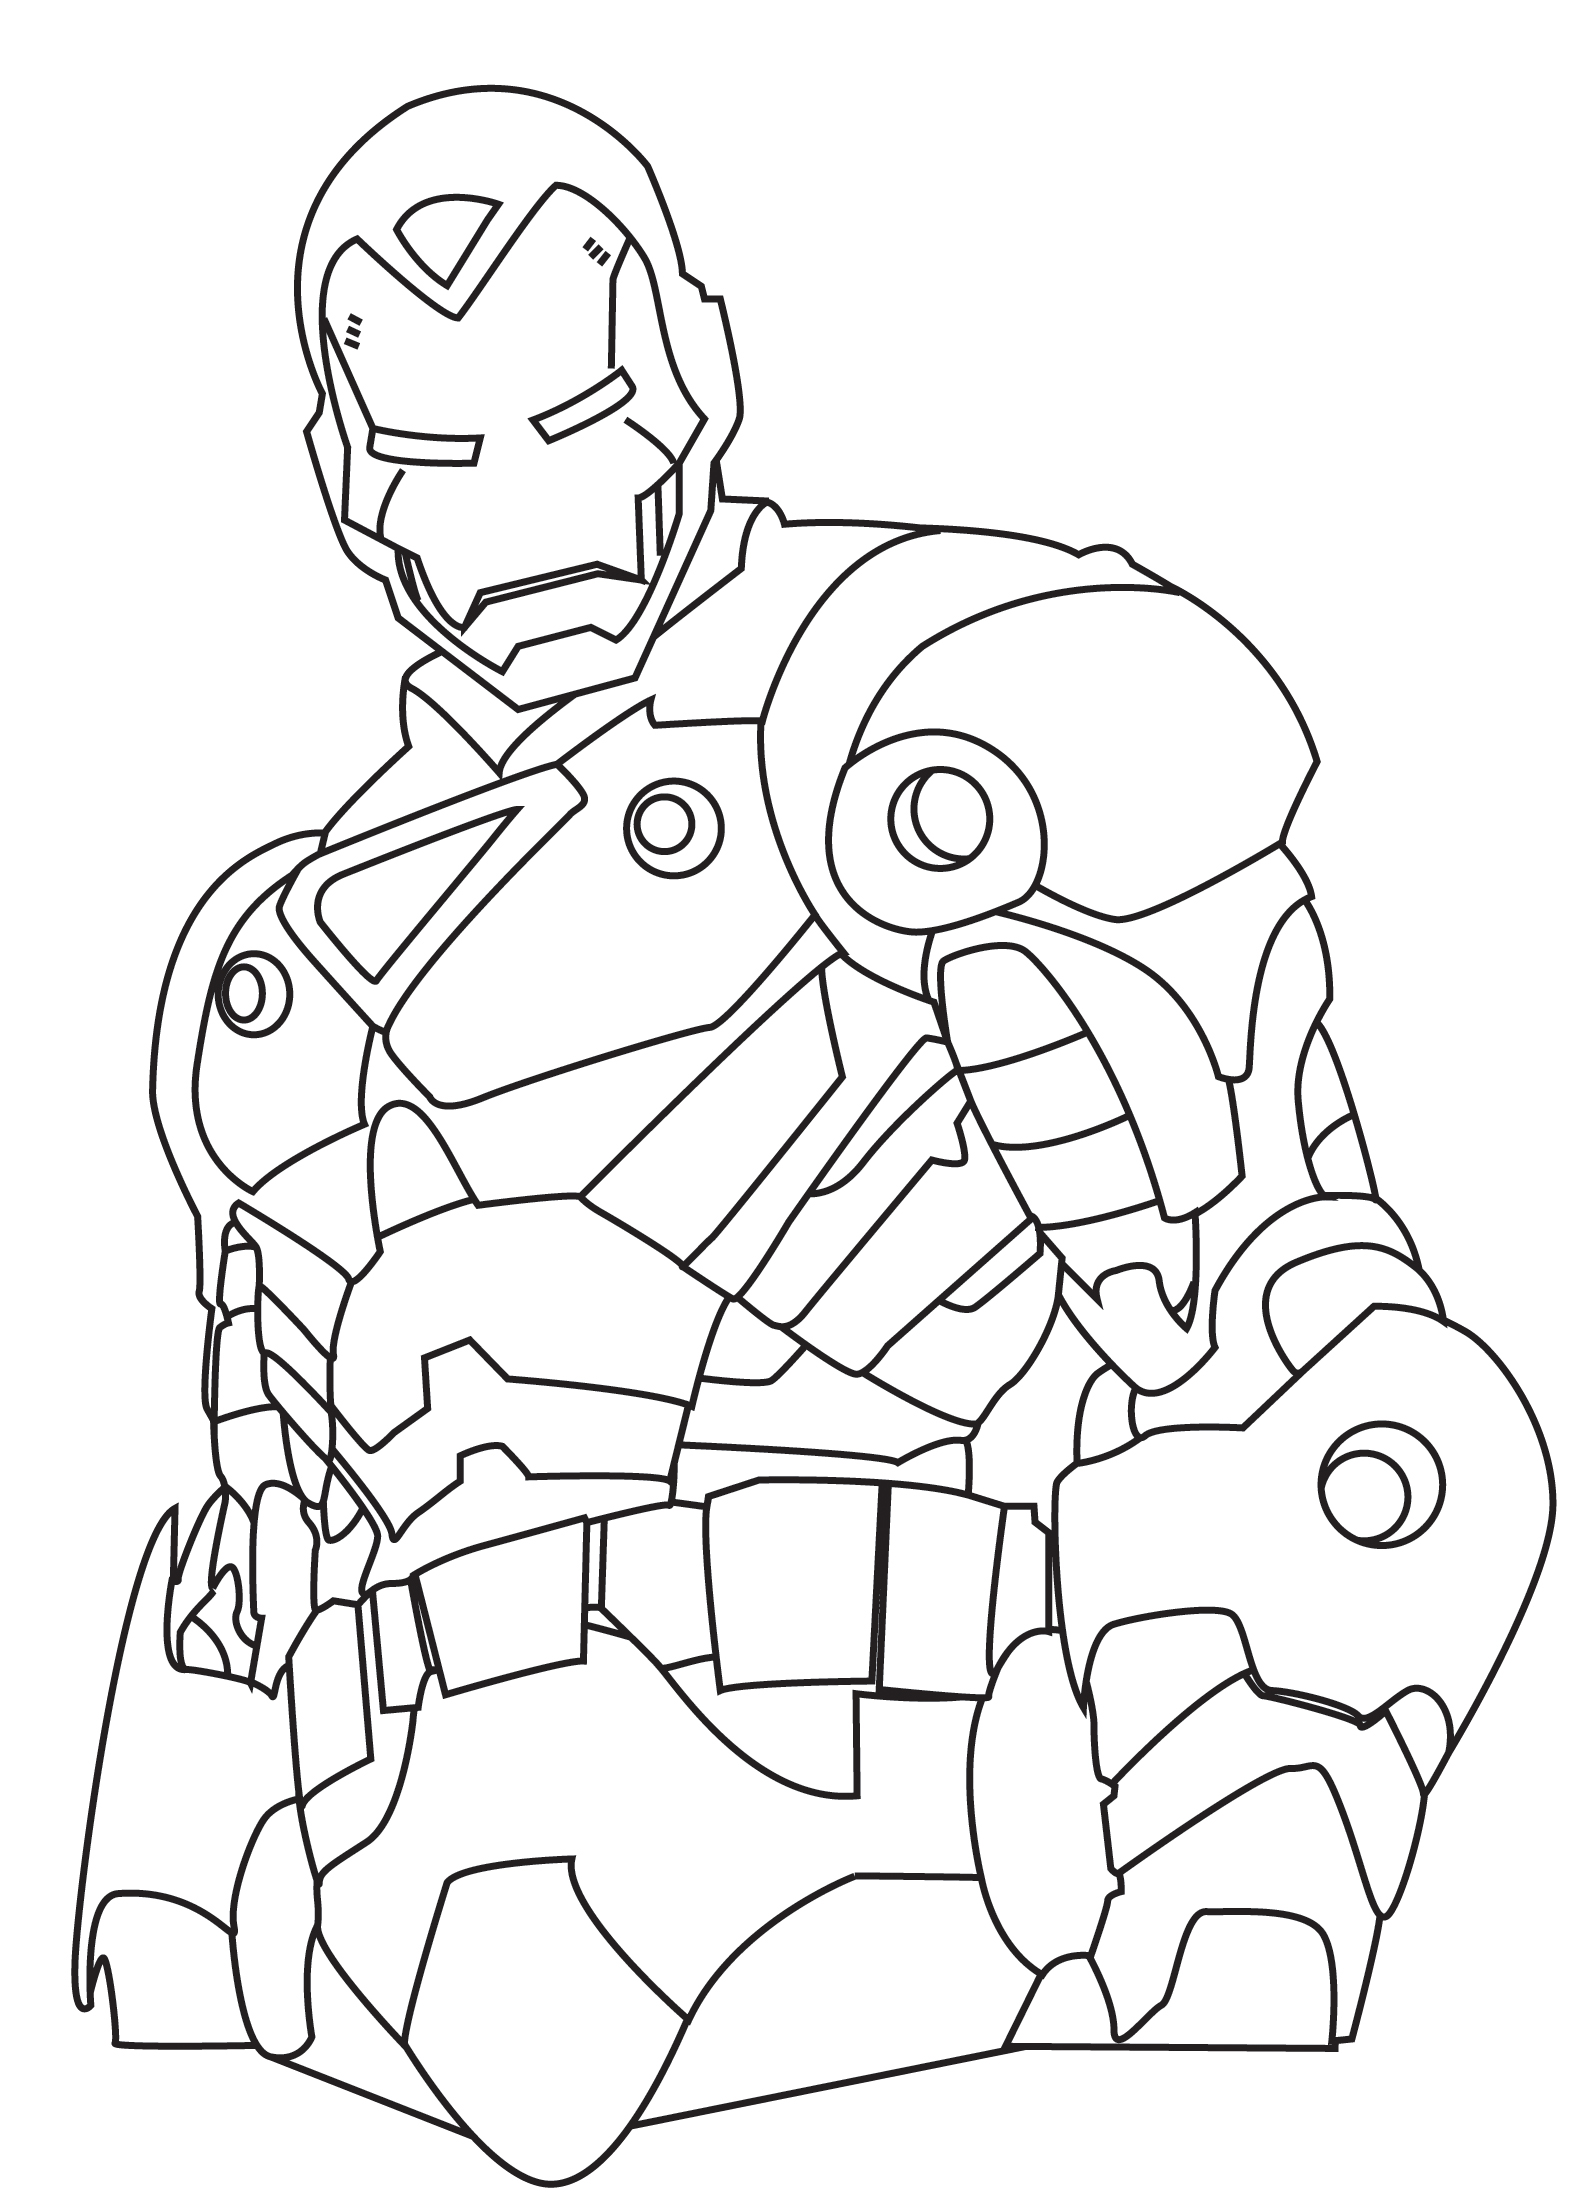 Lego Iron Man Coloring Page images & pictures - NearPics